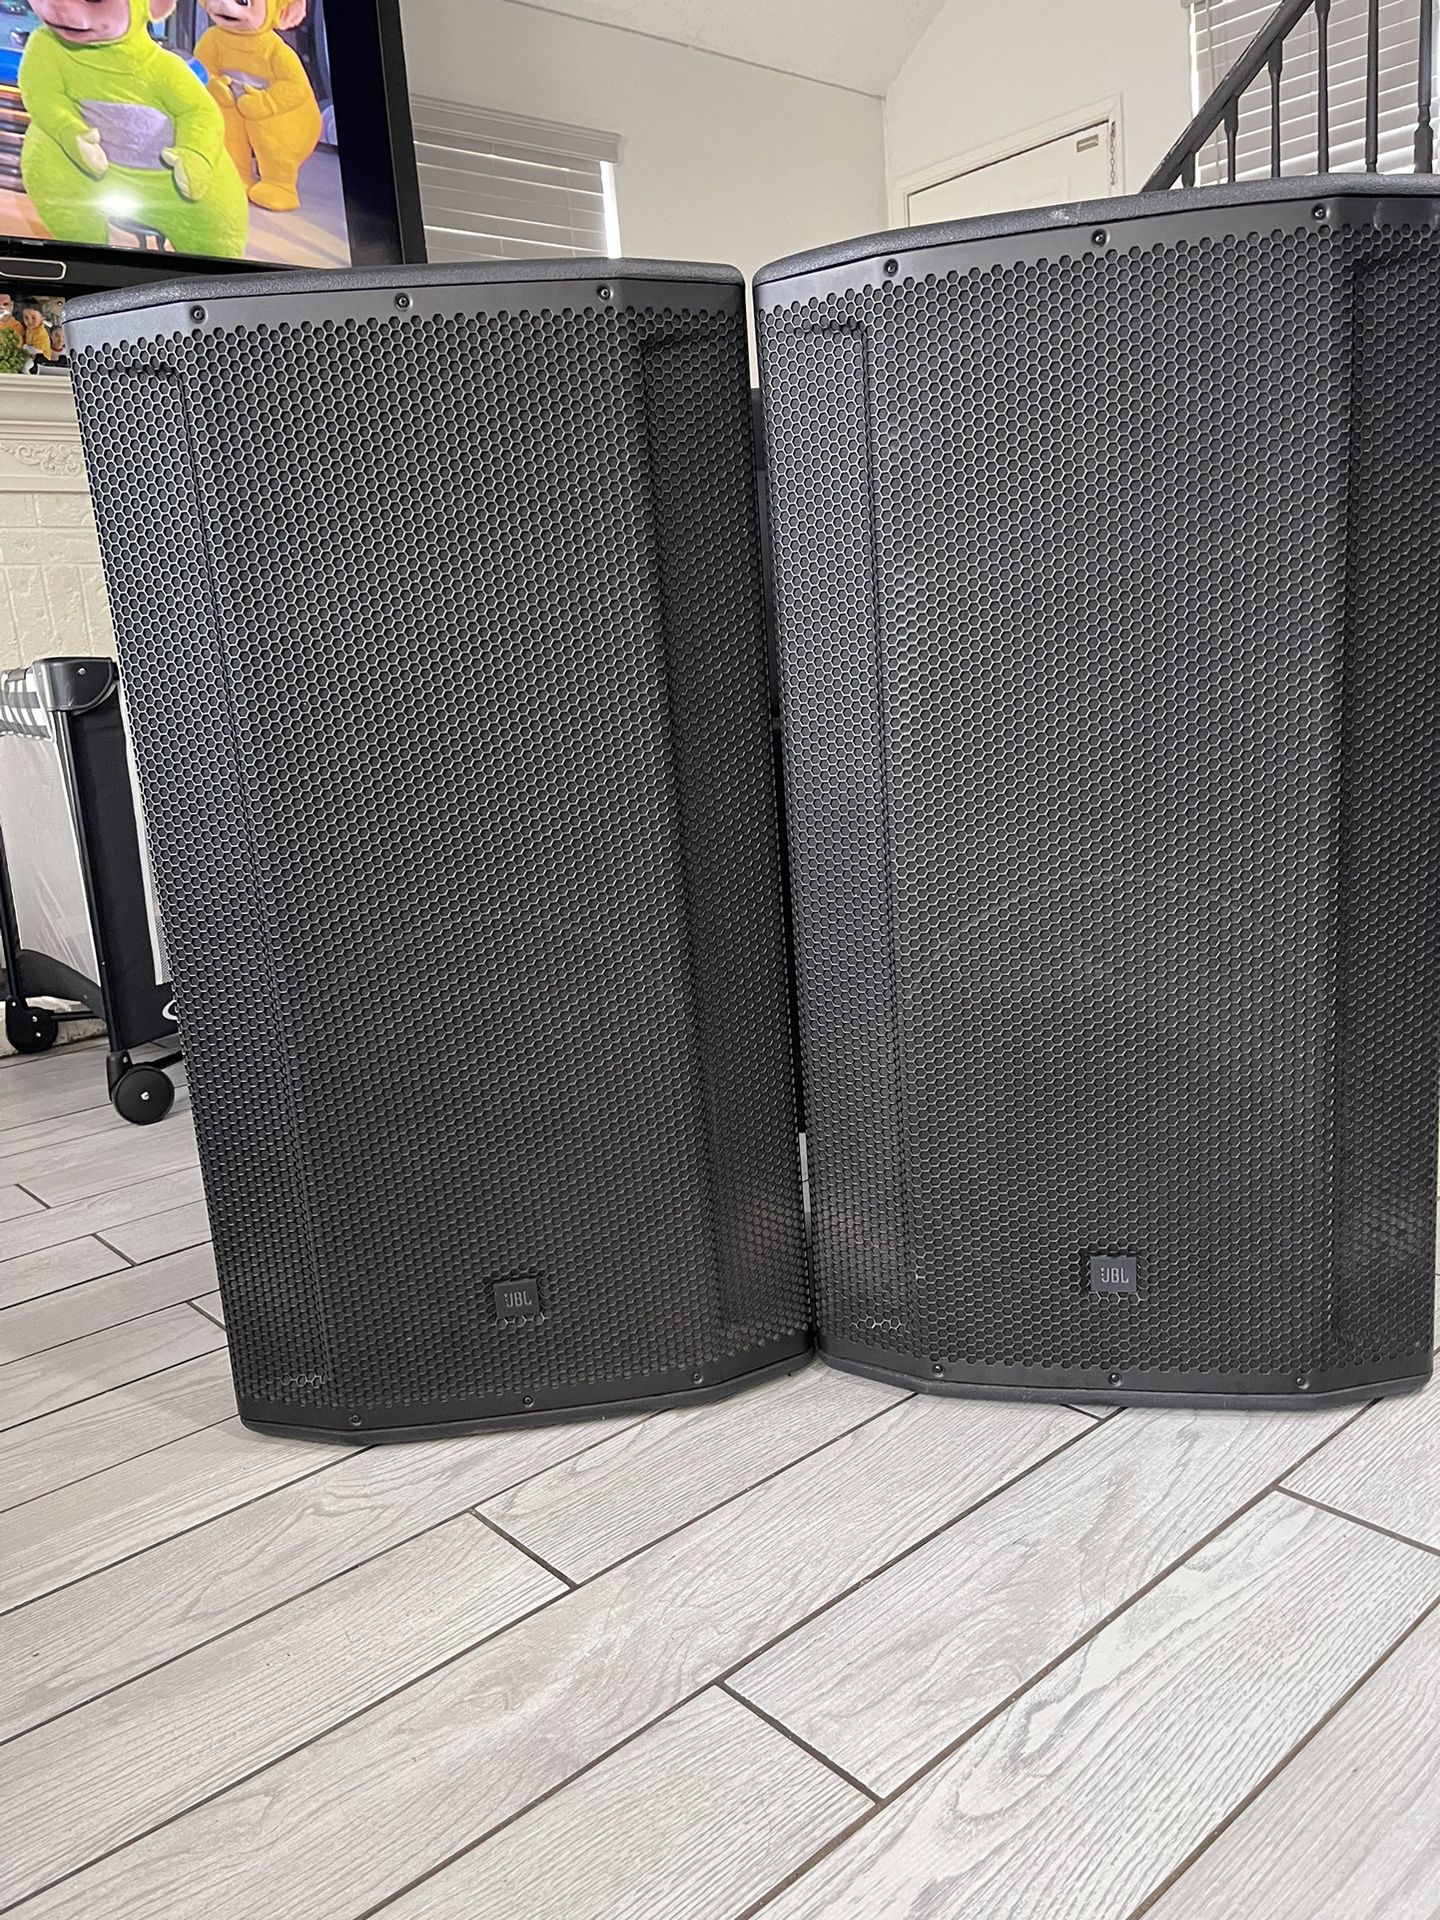 2 Jbl Srx 835p With Covers